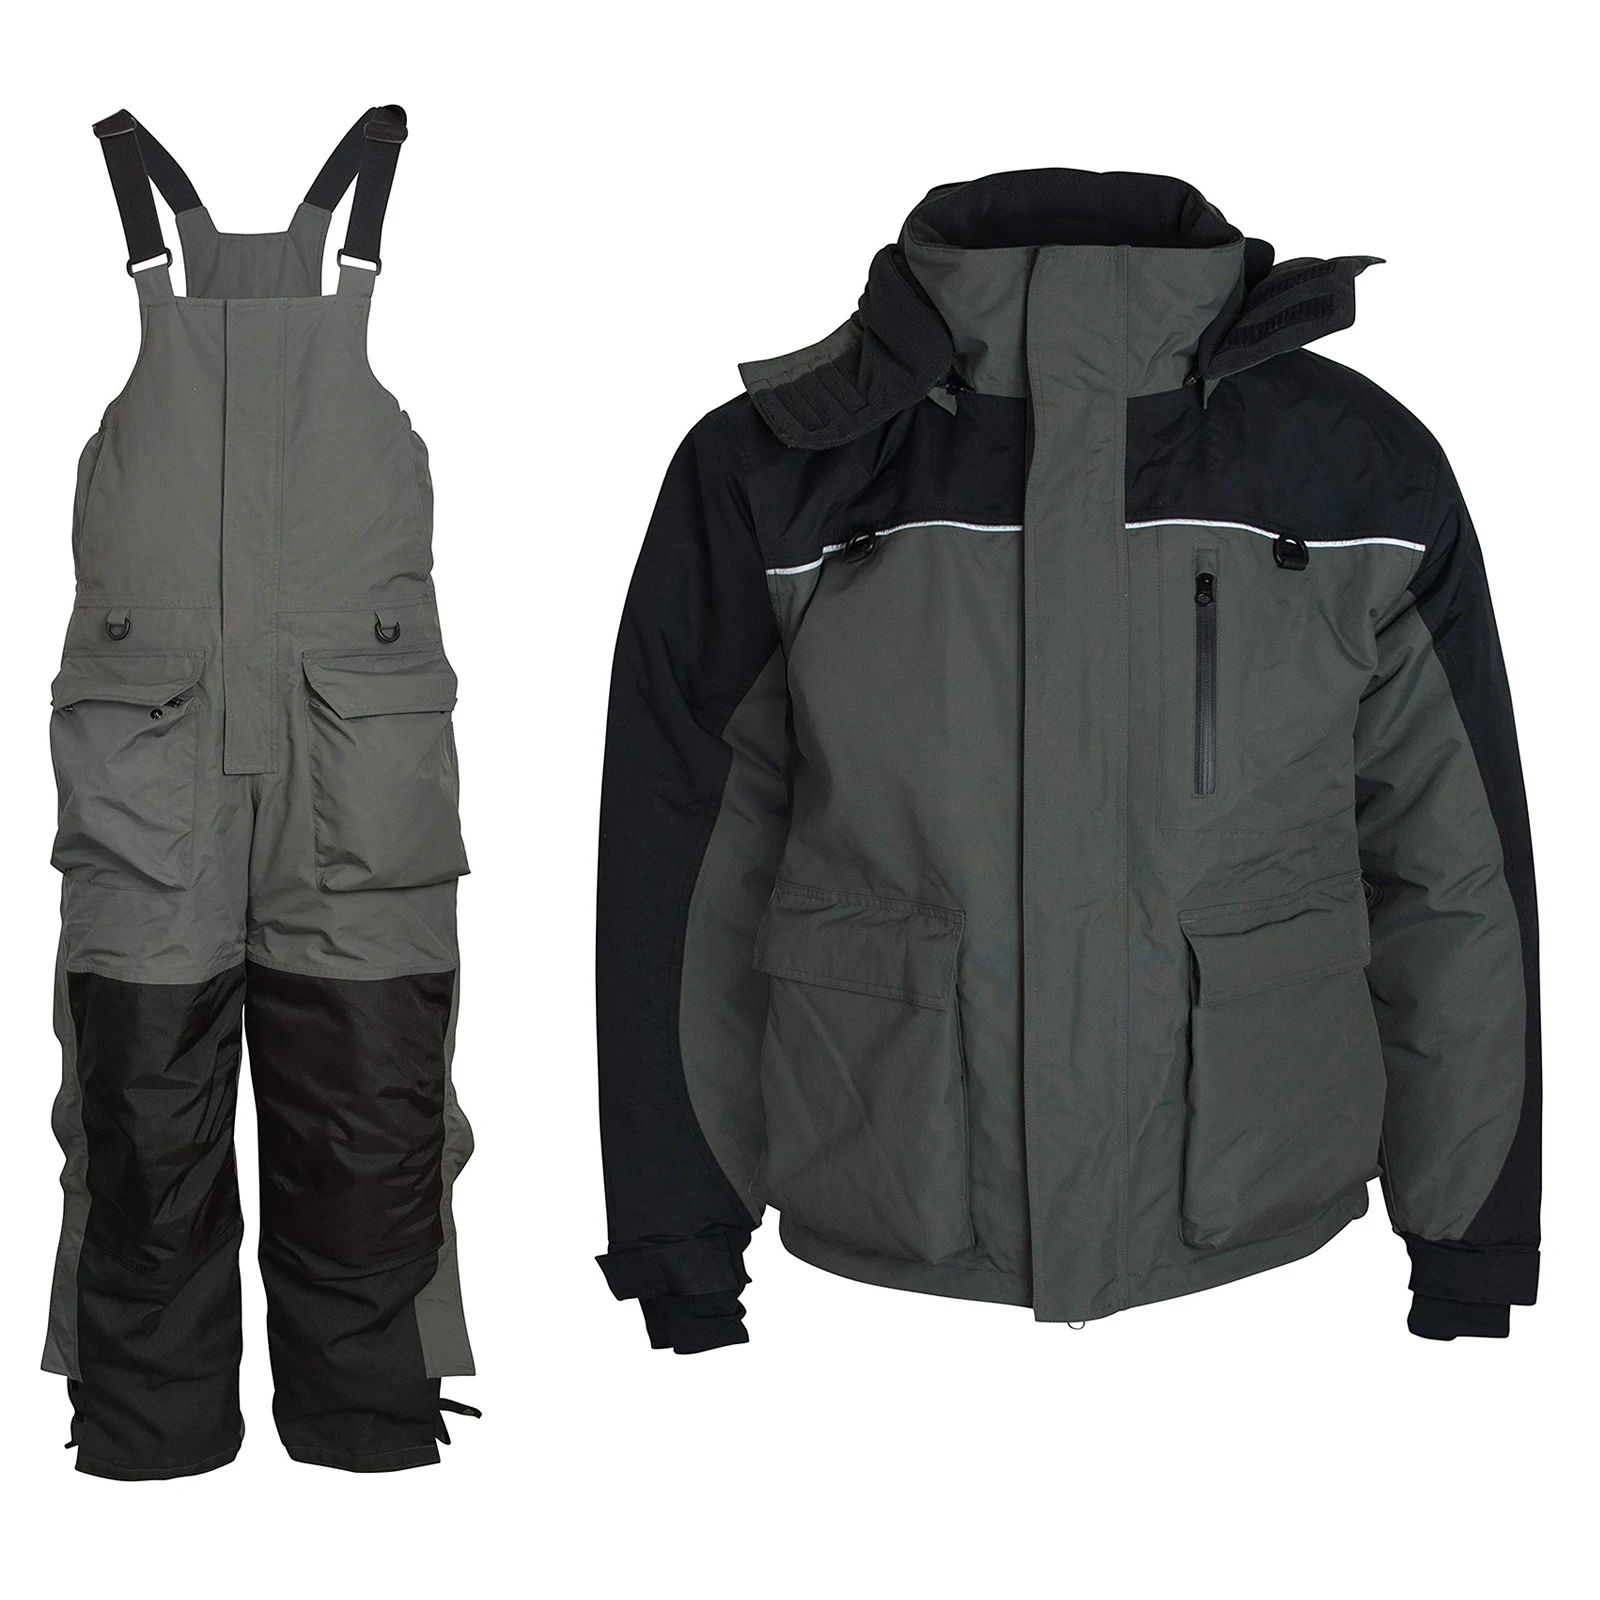 WindRider Ice Fishing Suit Insulated Bibs And Jacket